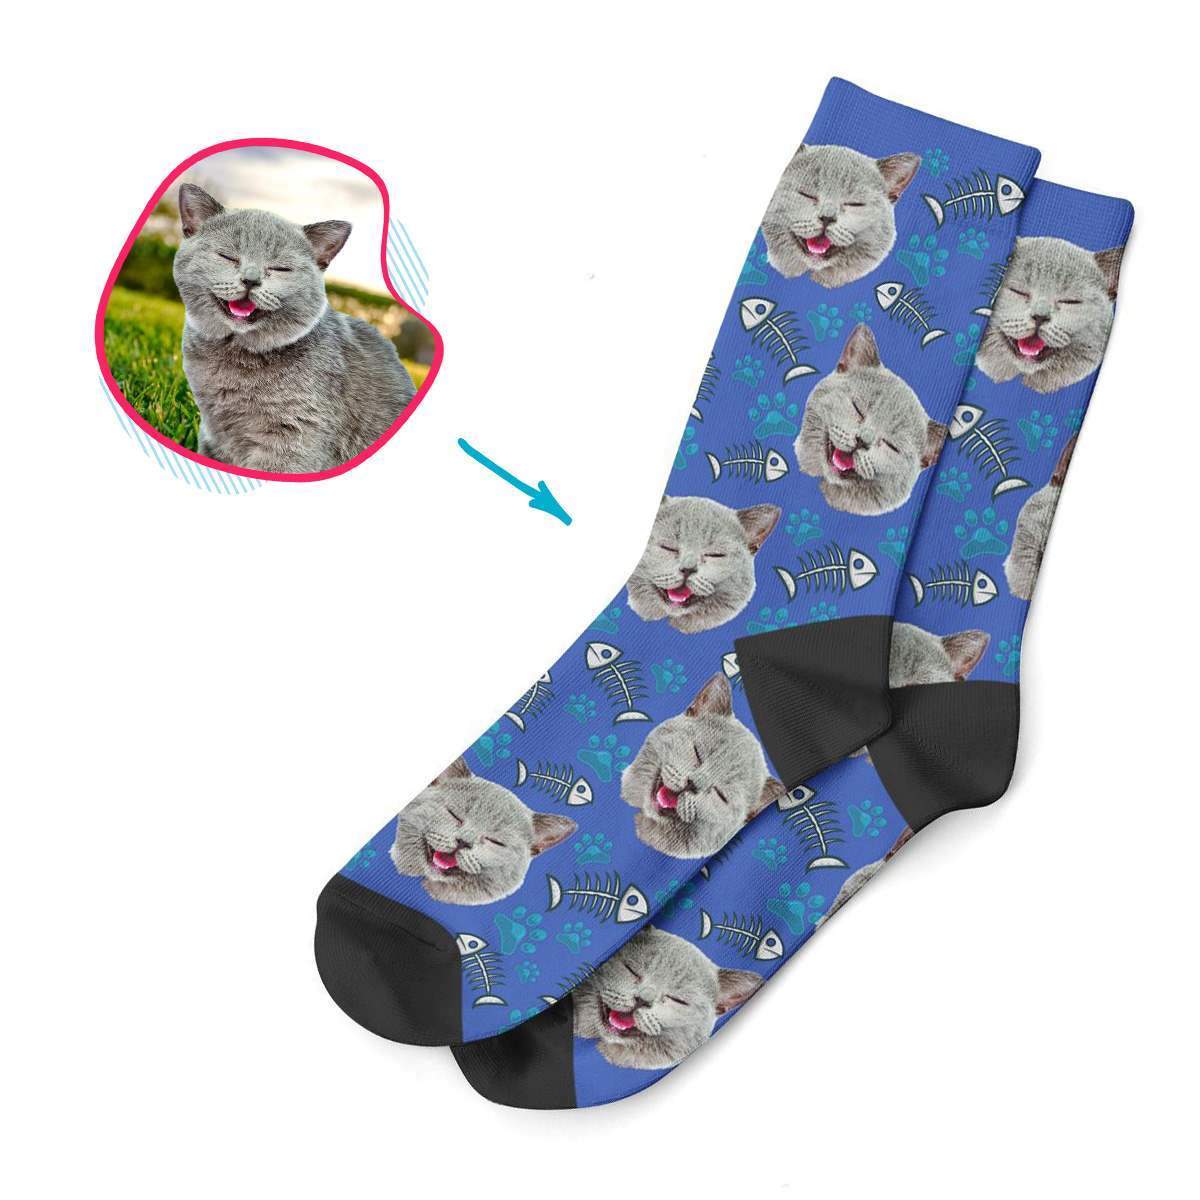 darkblue Cat socks personalized with photo of face printed on them